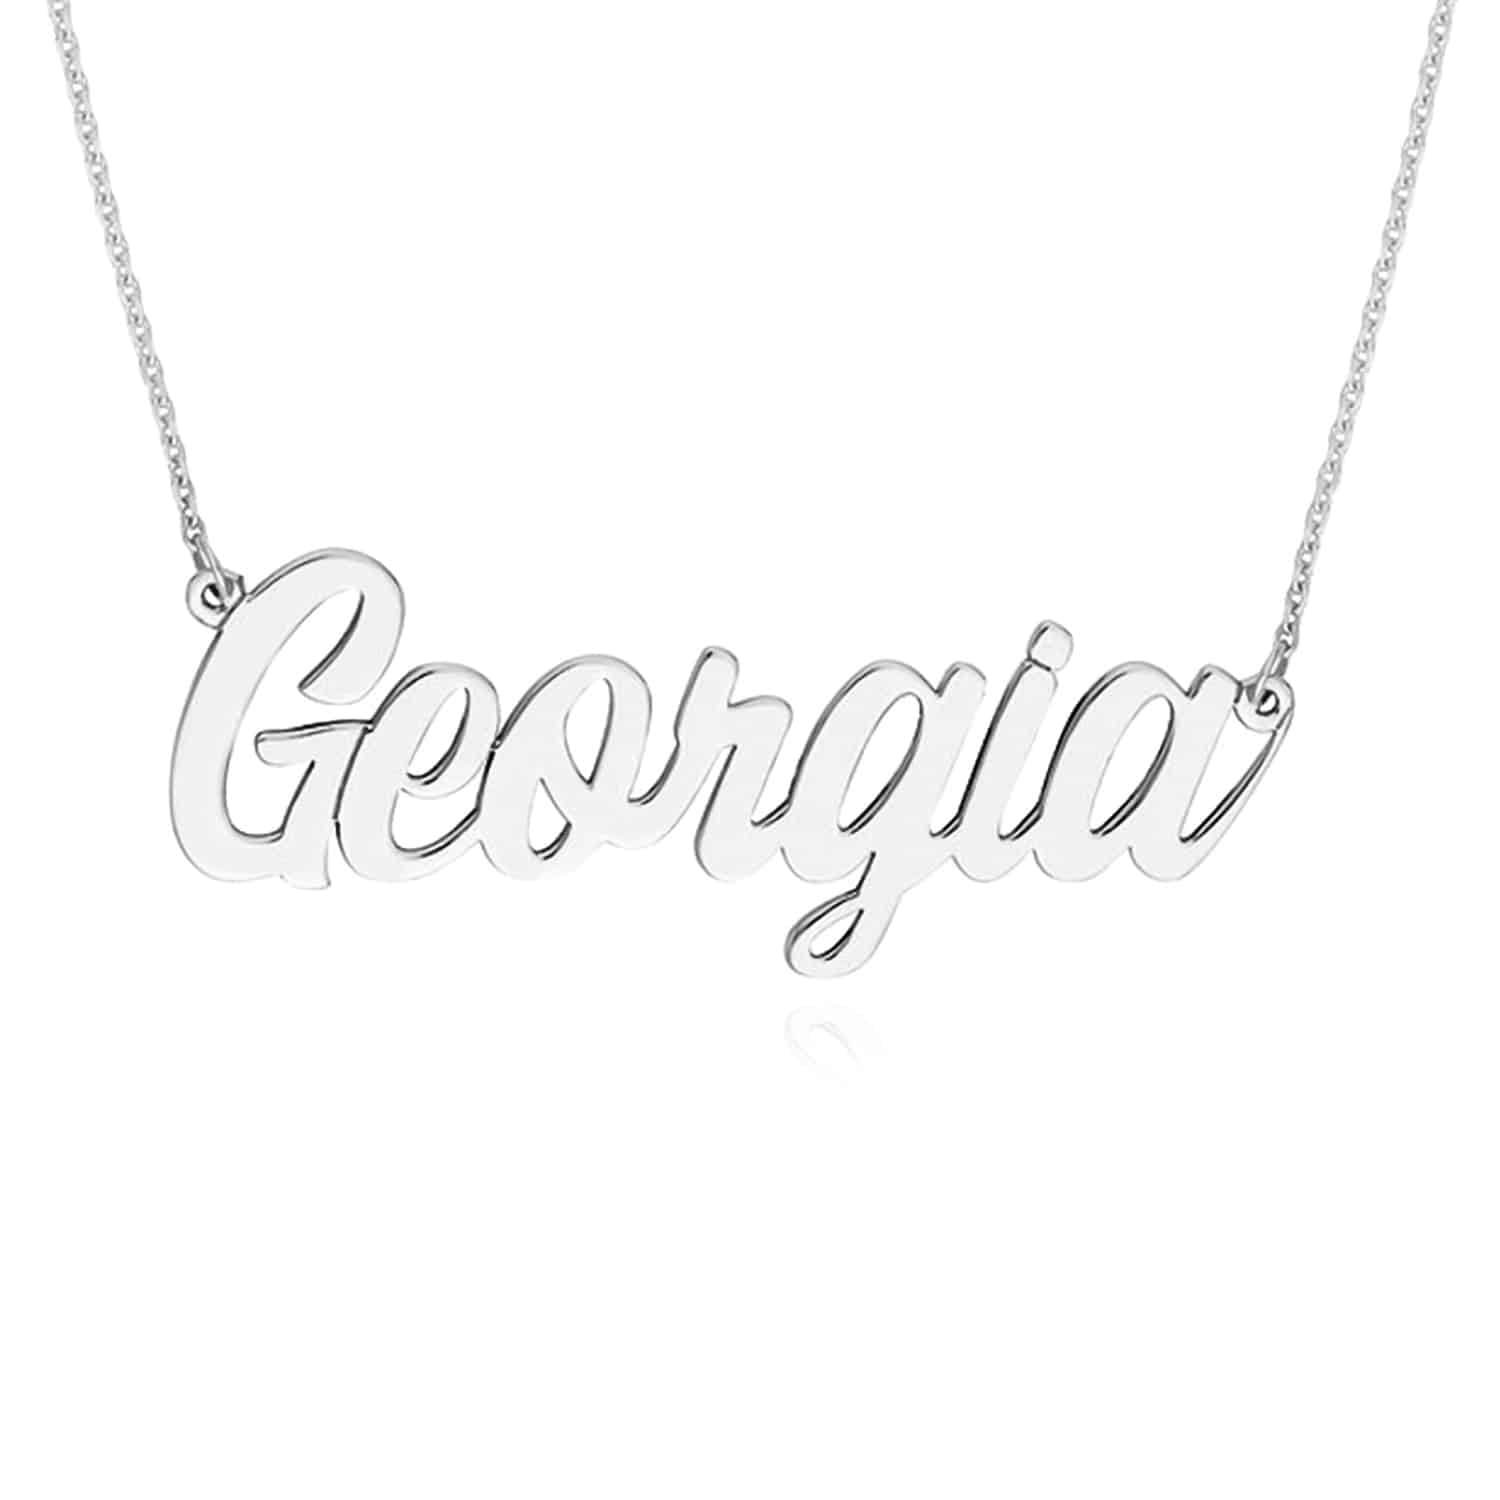 Customizable 14K Gold Yellow White Rose Script Nameplate Pendant Necklace 14-18" - White Gold, 16"-18" Adjustable